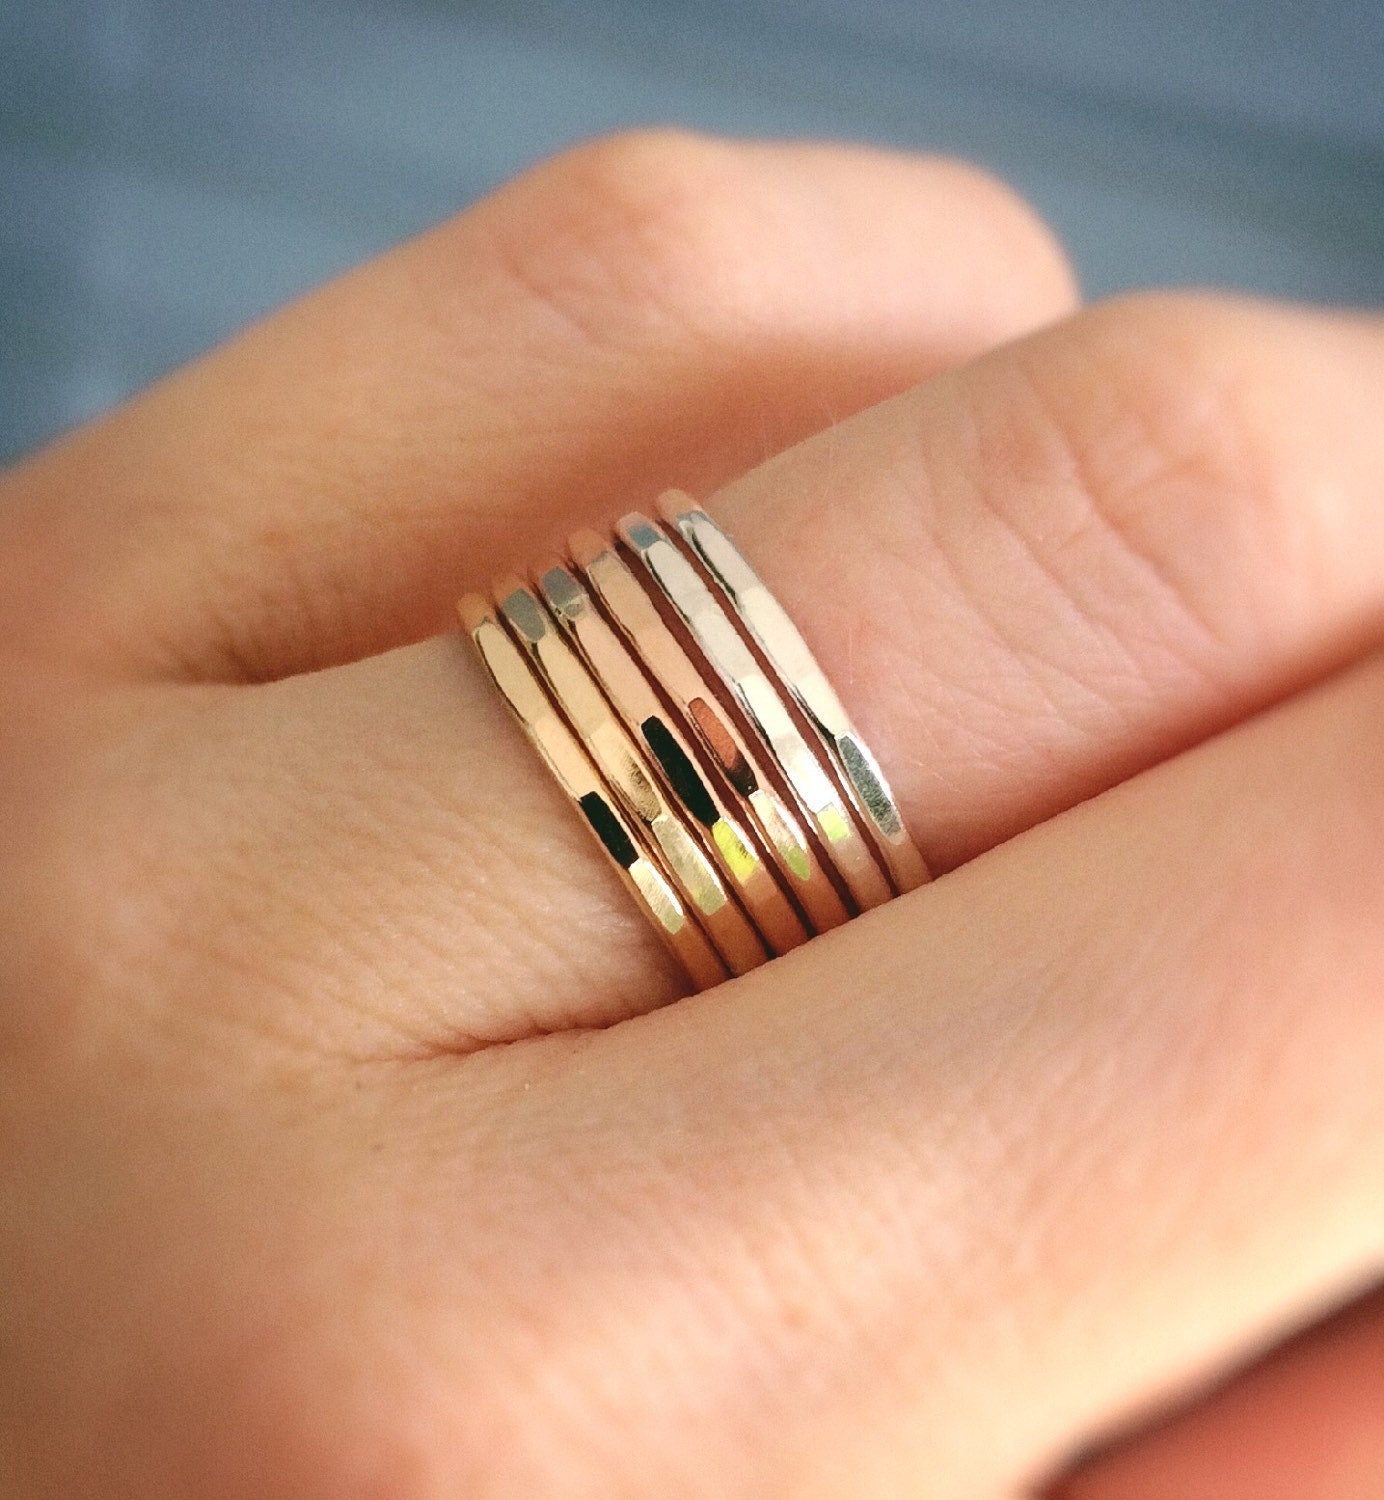 Textured Rings,Heavy Textured Rings,Stacking Rings,Modern Boho Ring,Textured Rings,Boho Chic,Minimalist Rings,Thick Rings,Modest,Simple